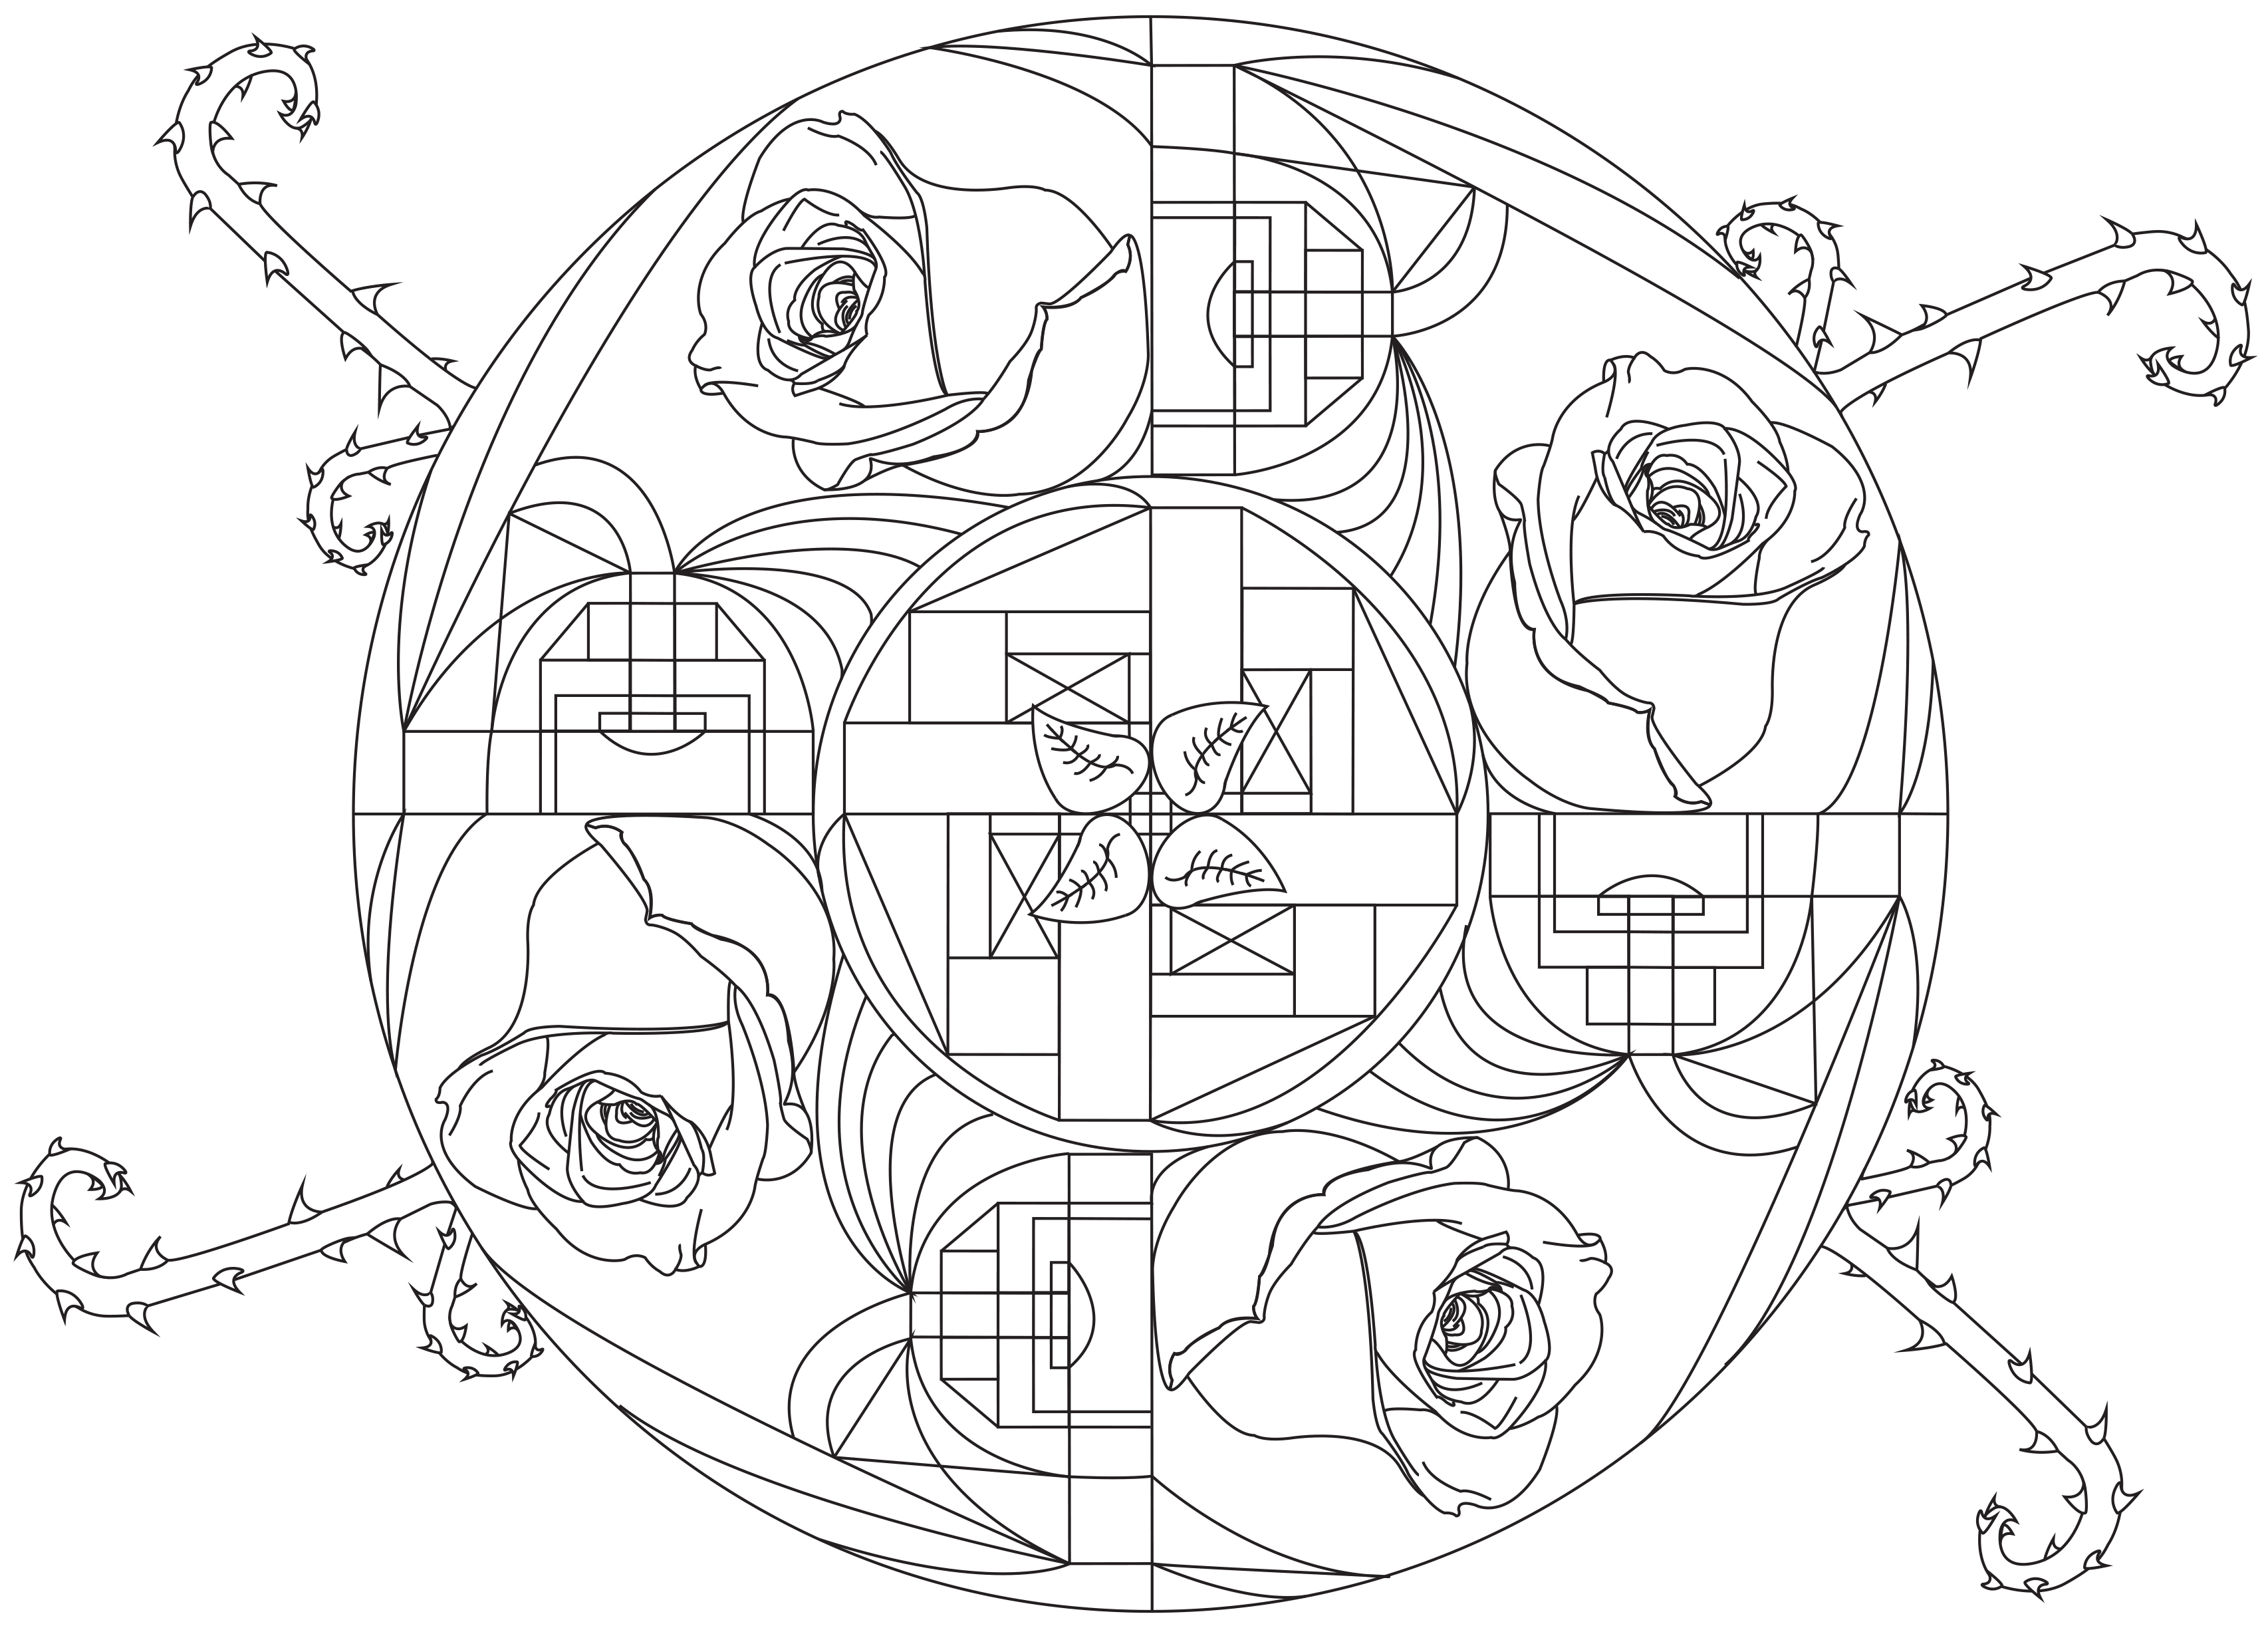 Mandalas coloring page to print and color for free